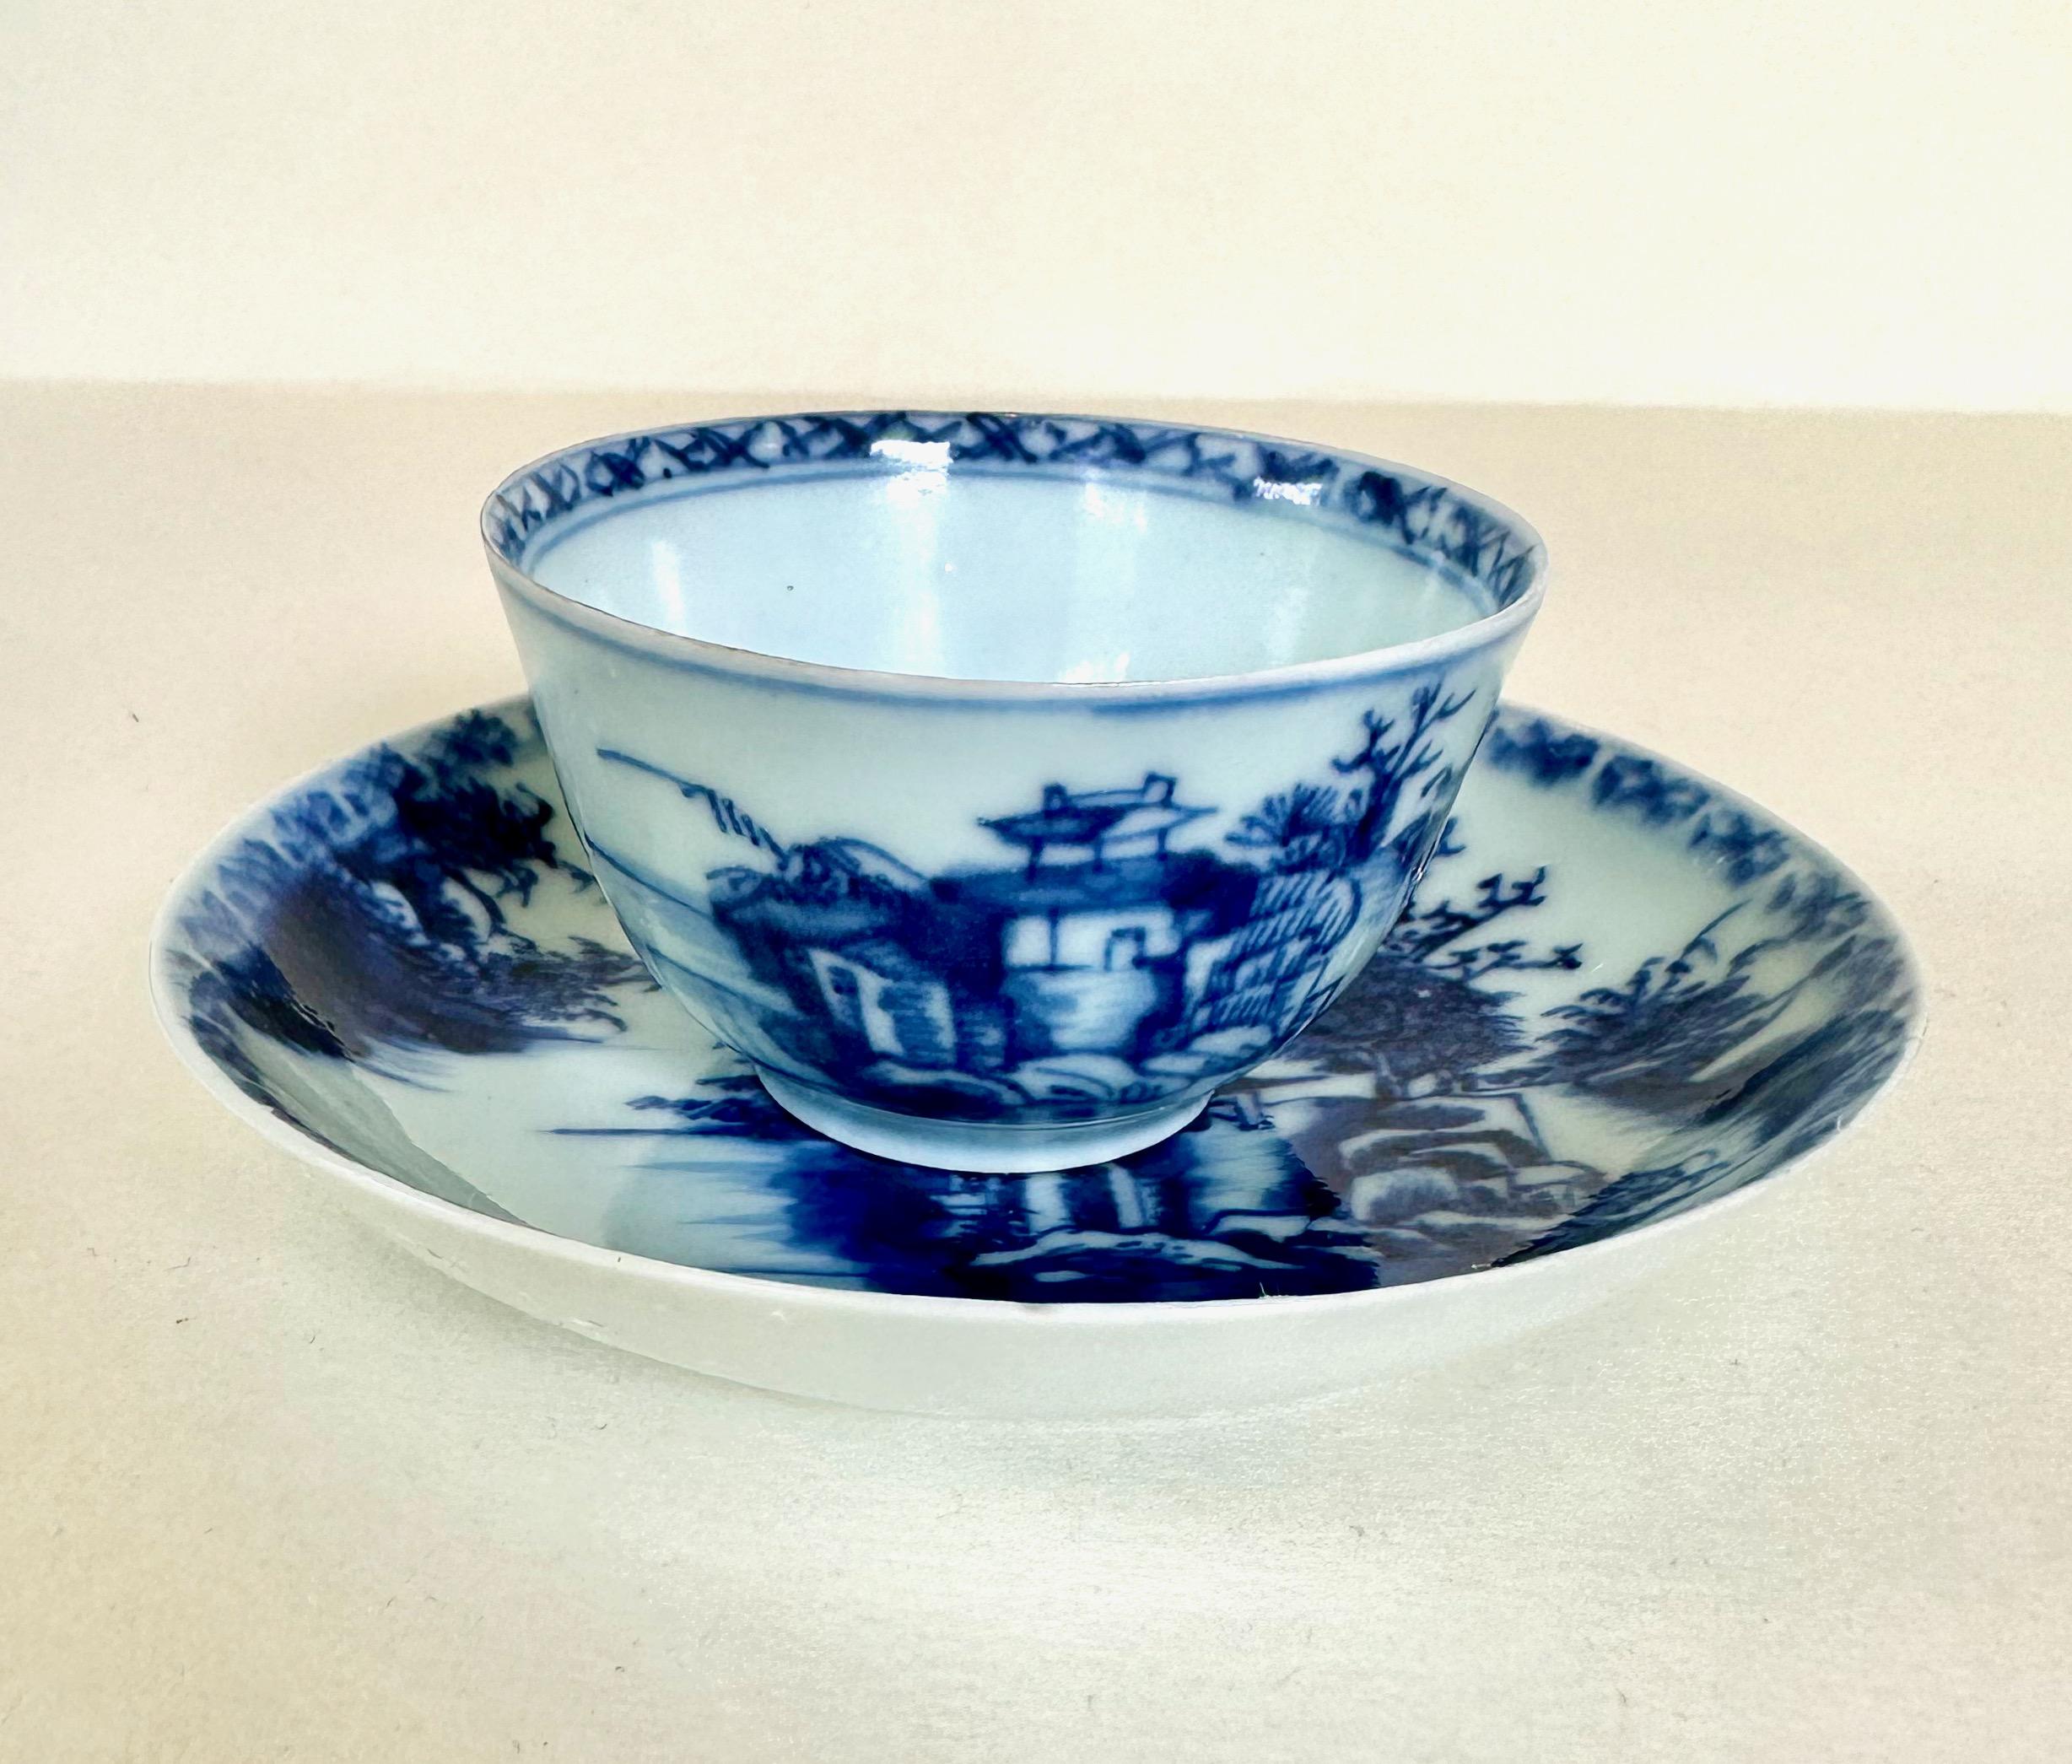 One set of blue and white Qing Dynasty cup and saucer recovered from the Nanking Cargo. A large cache of porcelain and other merchandise was discovered on the wreck of a Dutch East India Company ship, the Geldermalsen, which sank in the South China